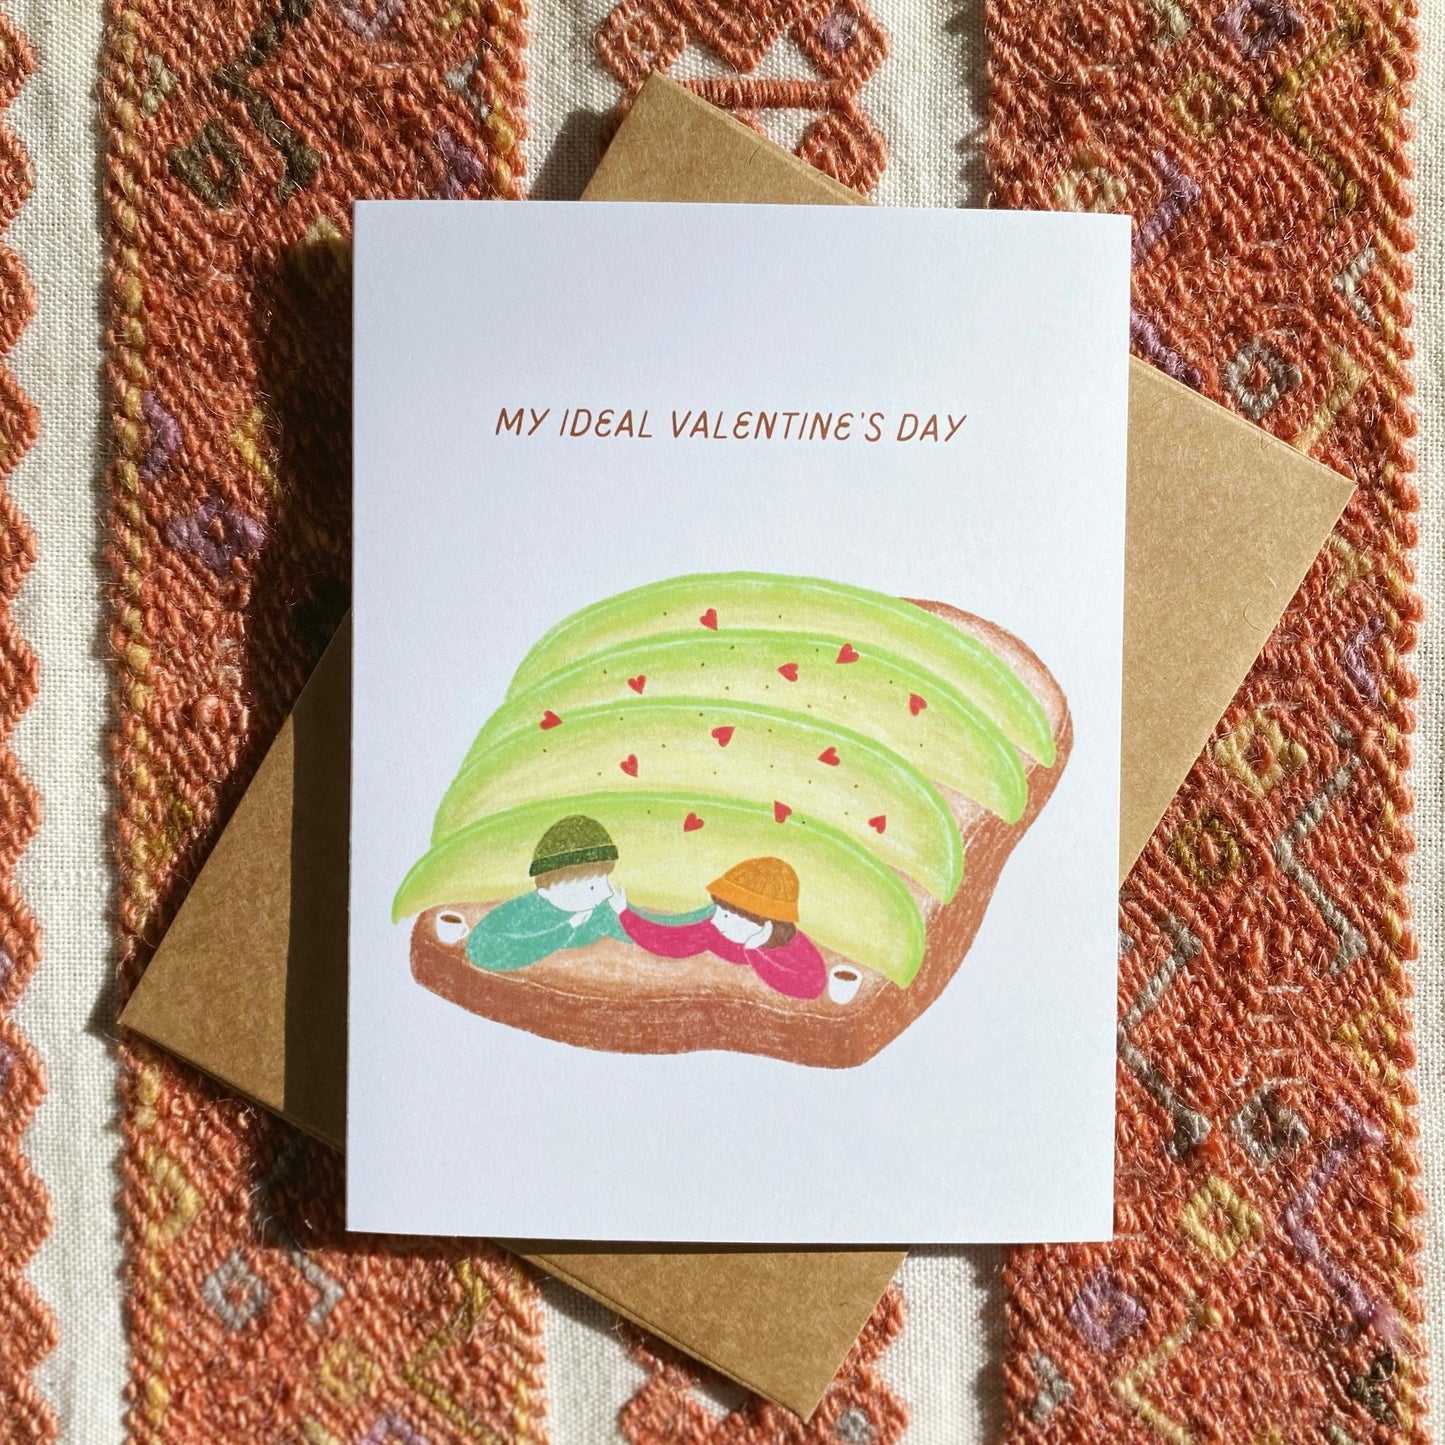 Cute Valentine's Day Card with an Avocado Toast and Coffee Lovers